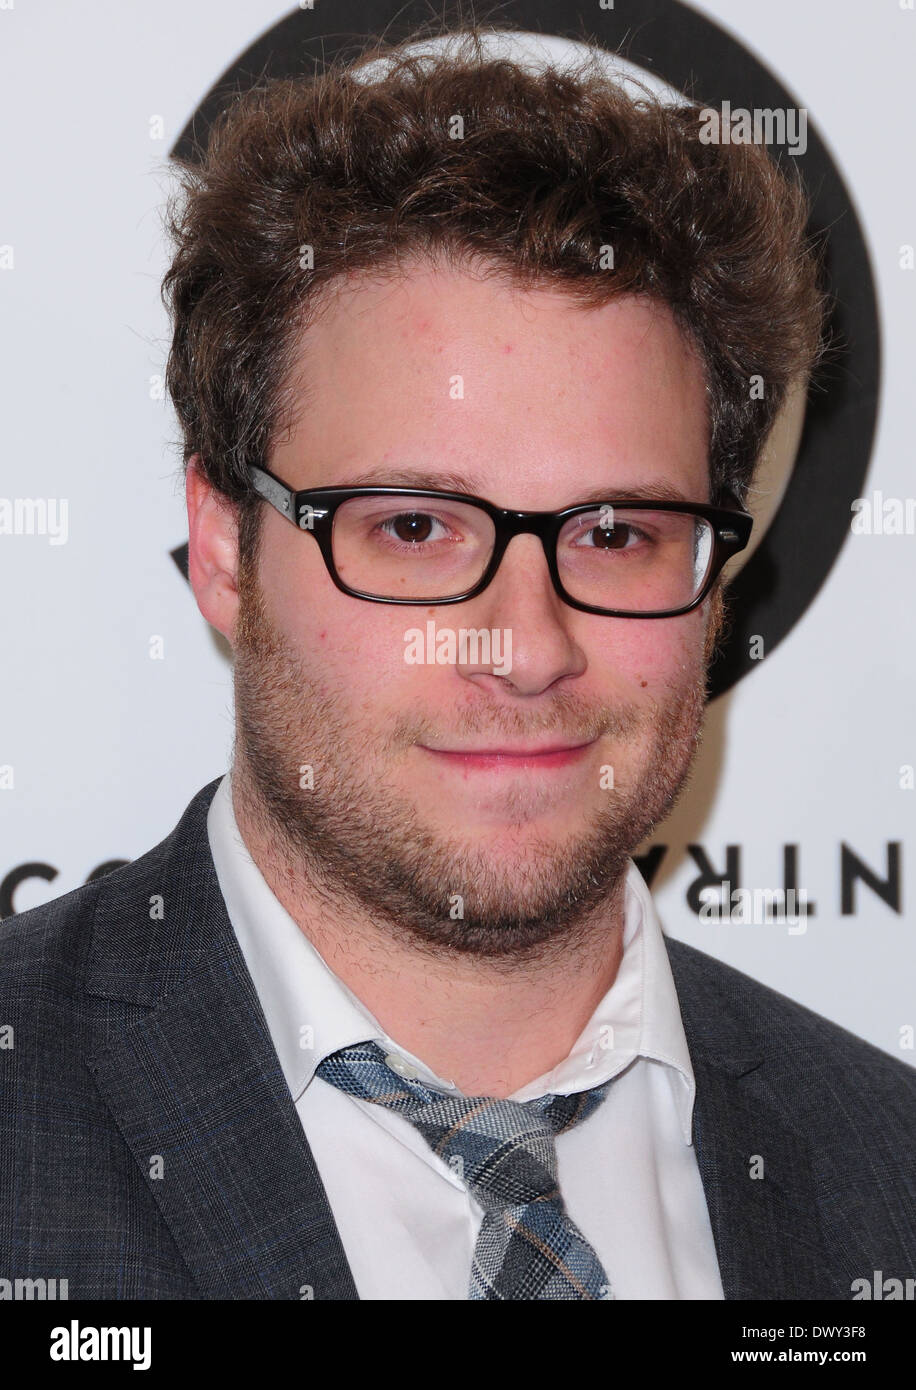 Seth Rogen Comedy Central's 'Night Of Too Many Stars: America Comes Together For Autism Programs' - Arrivals Featuring: Seth Rogen Where: New York City, New York, United States When: 13 Oct 2012 Stock Photo